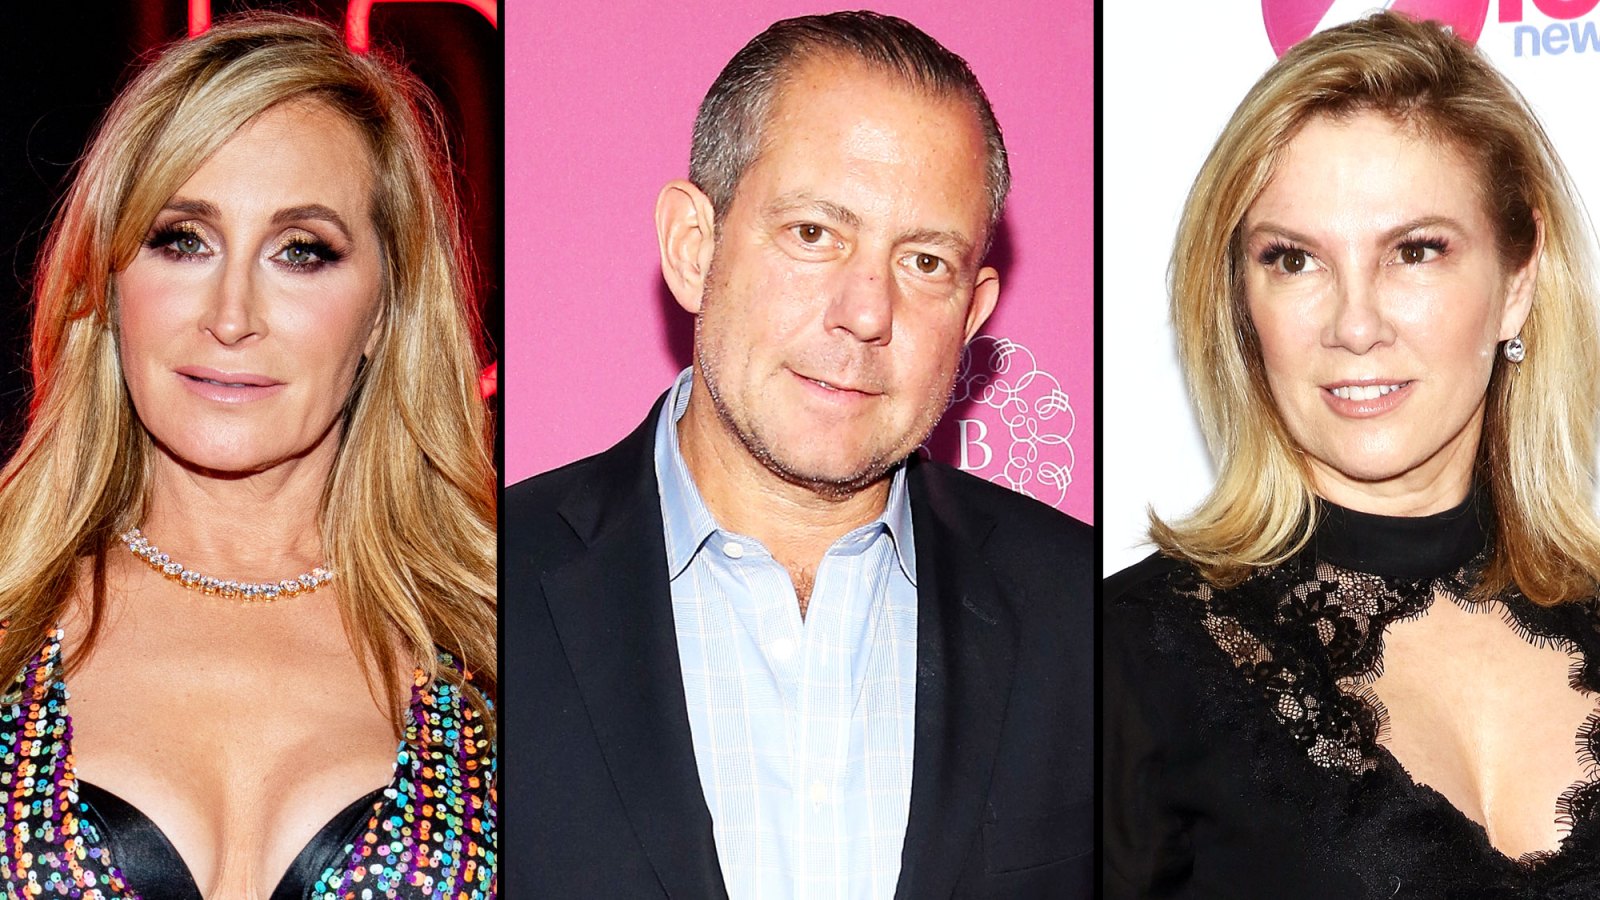 Sonja Morgan Says She Was ‘Not Happy’ With Harry Dubin After Ramona Singer Kiss Photos Surfaced